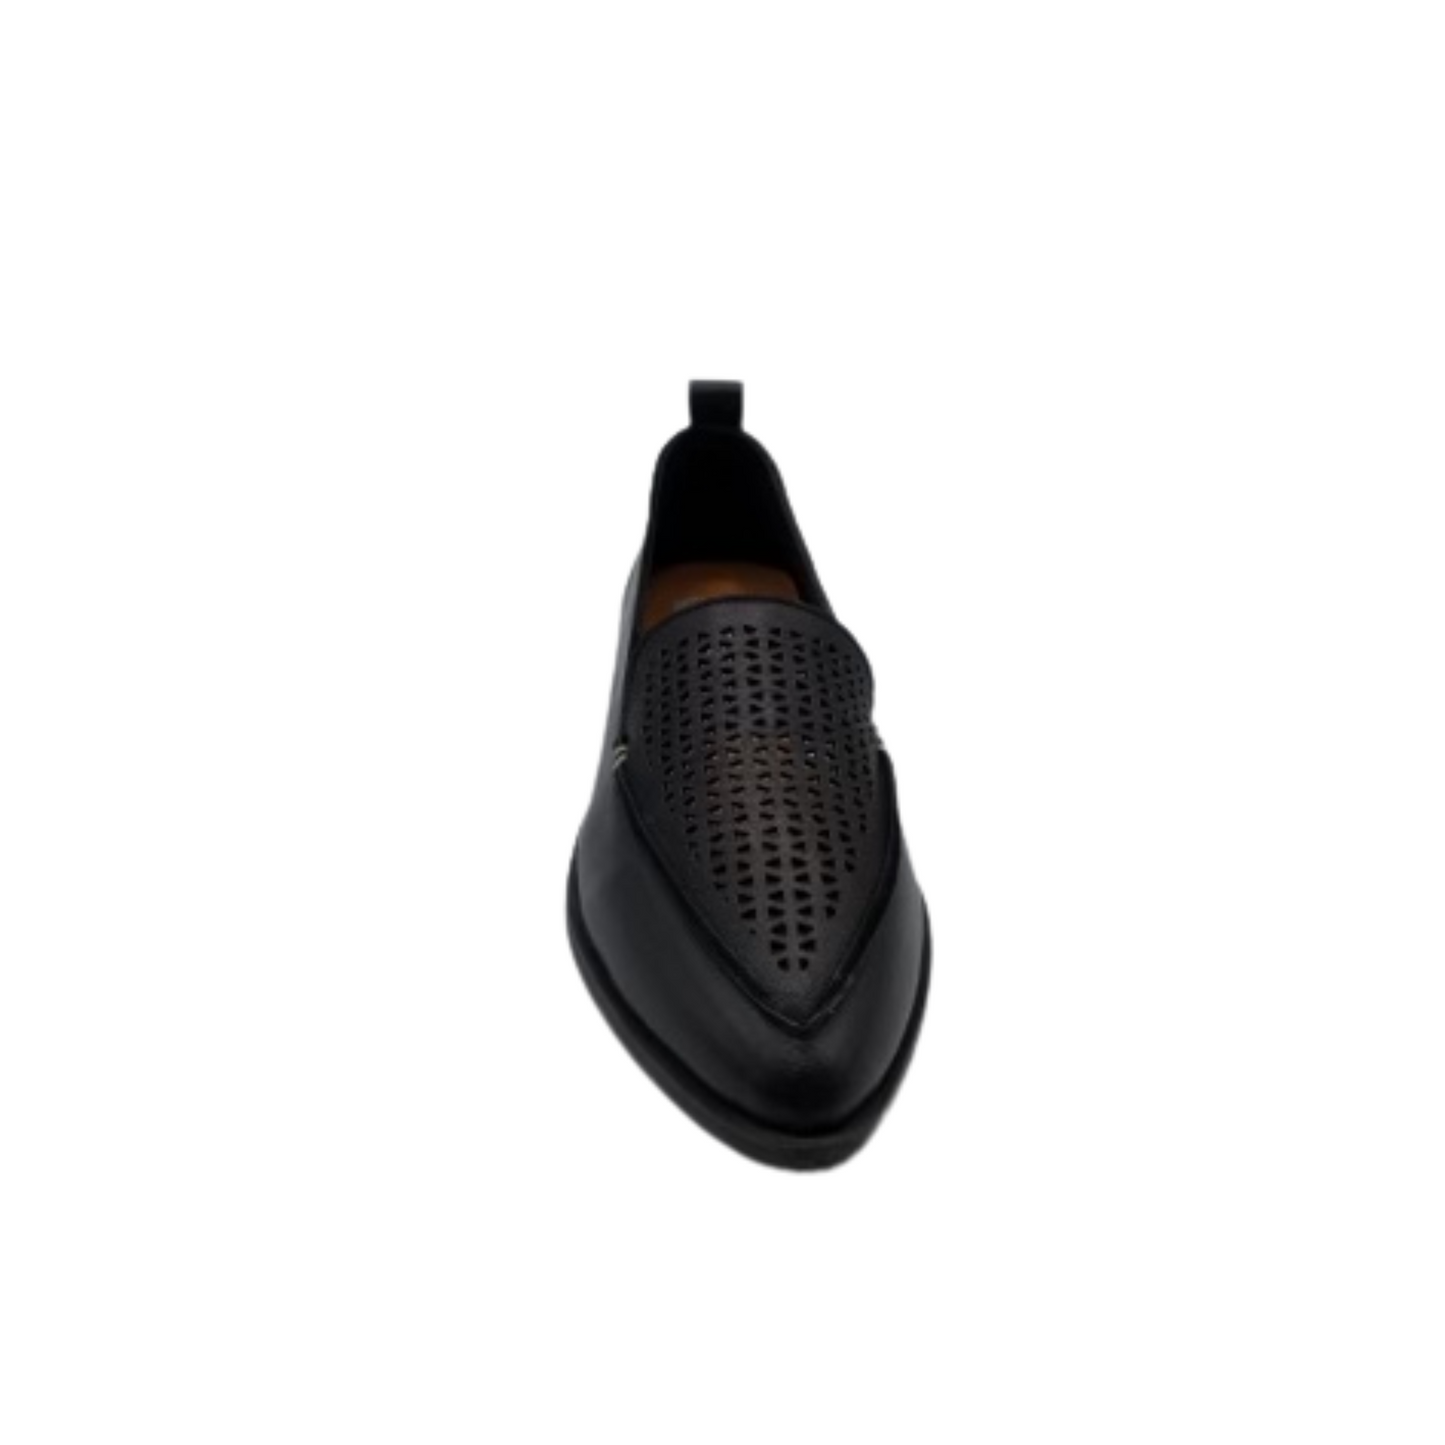 Bueno Blaze Loafer in black front view.